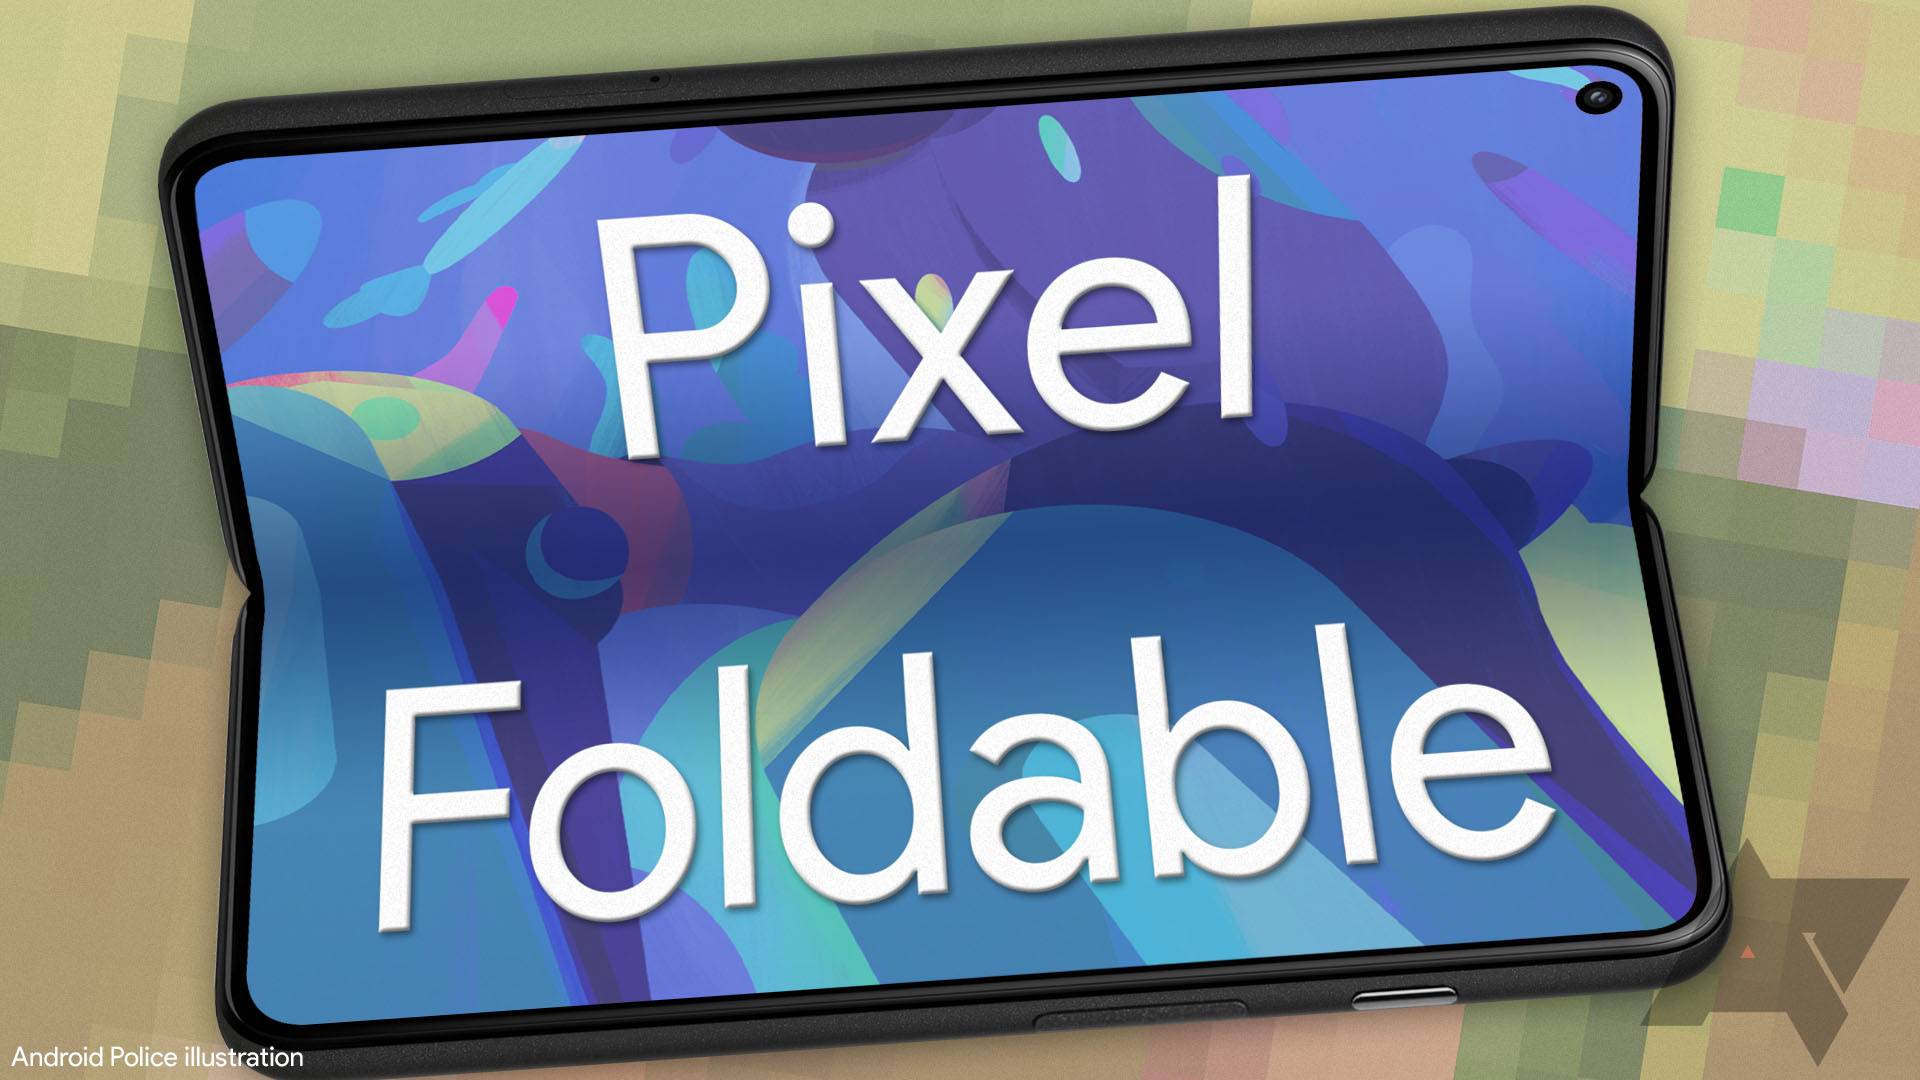 Google Pixel Fold coming early 2023, according to this leaker